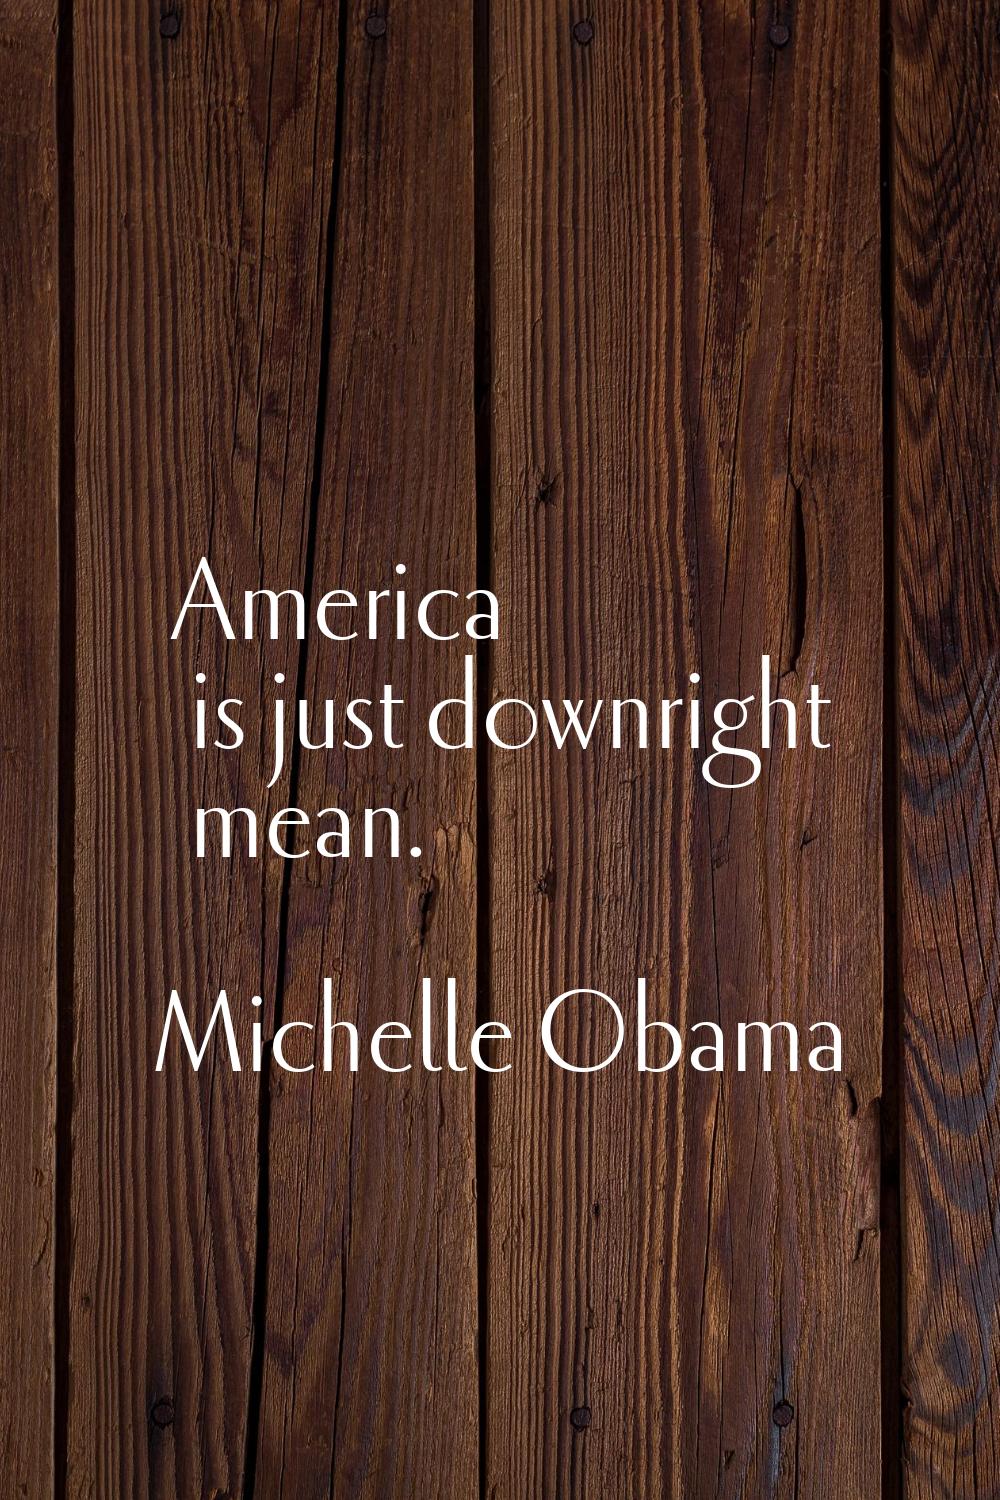 America is just downright mean.